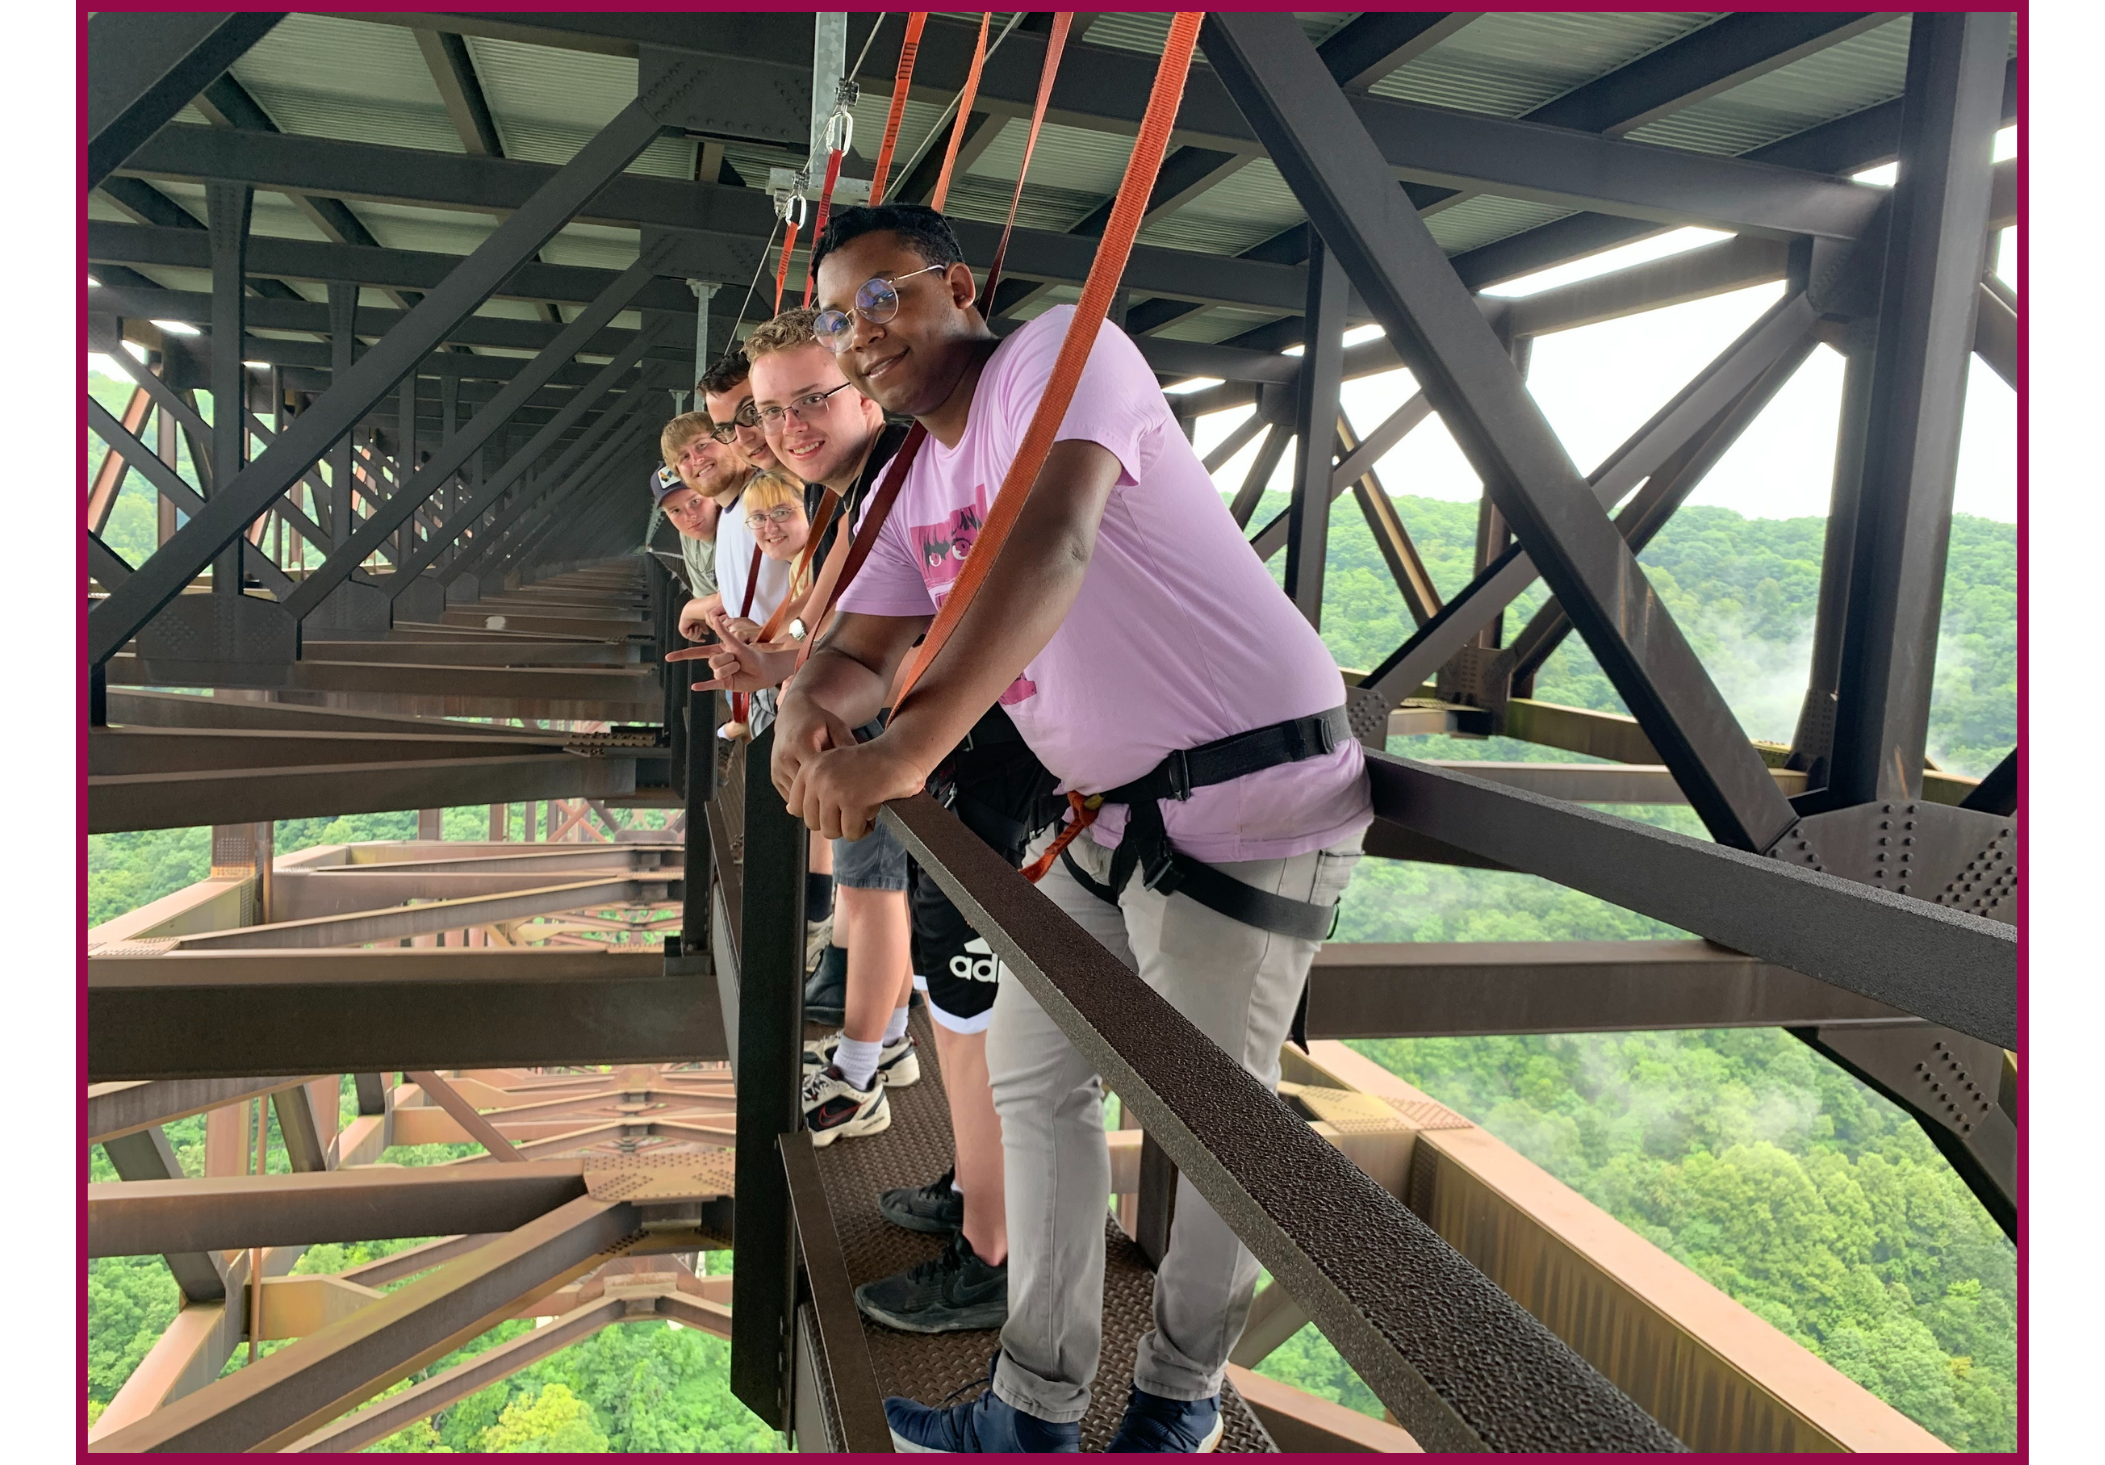 Upward Bound students at New River Gorge